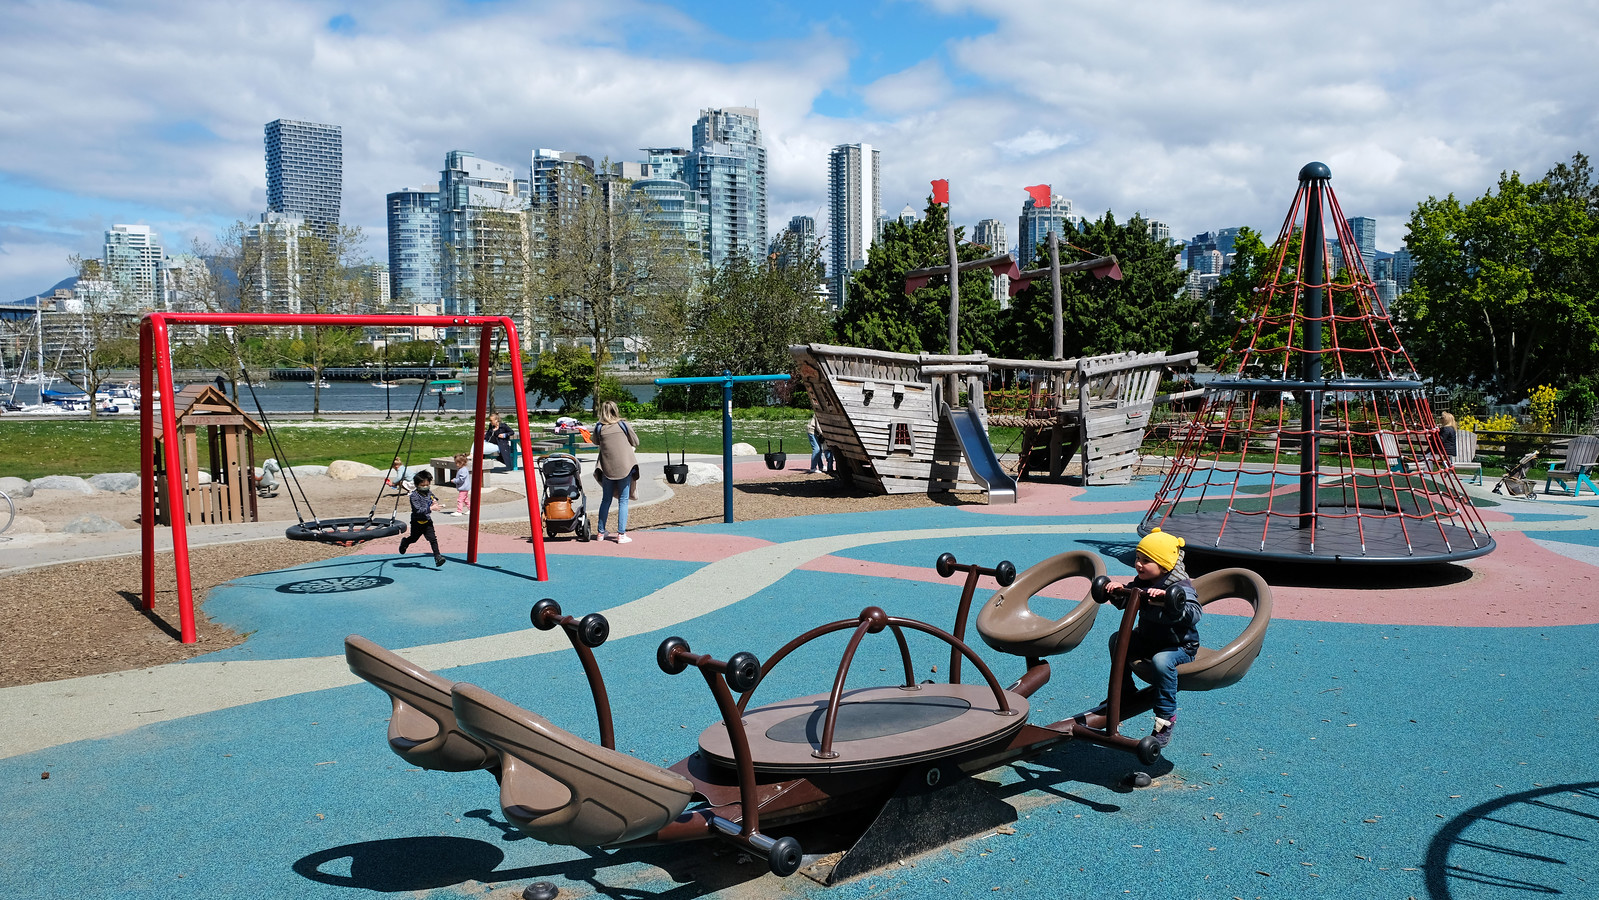 Charleson Park playground, Vancouver, BC, Canada